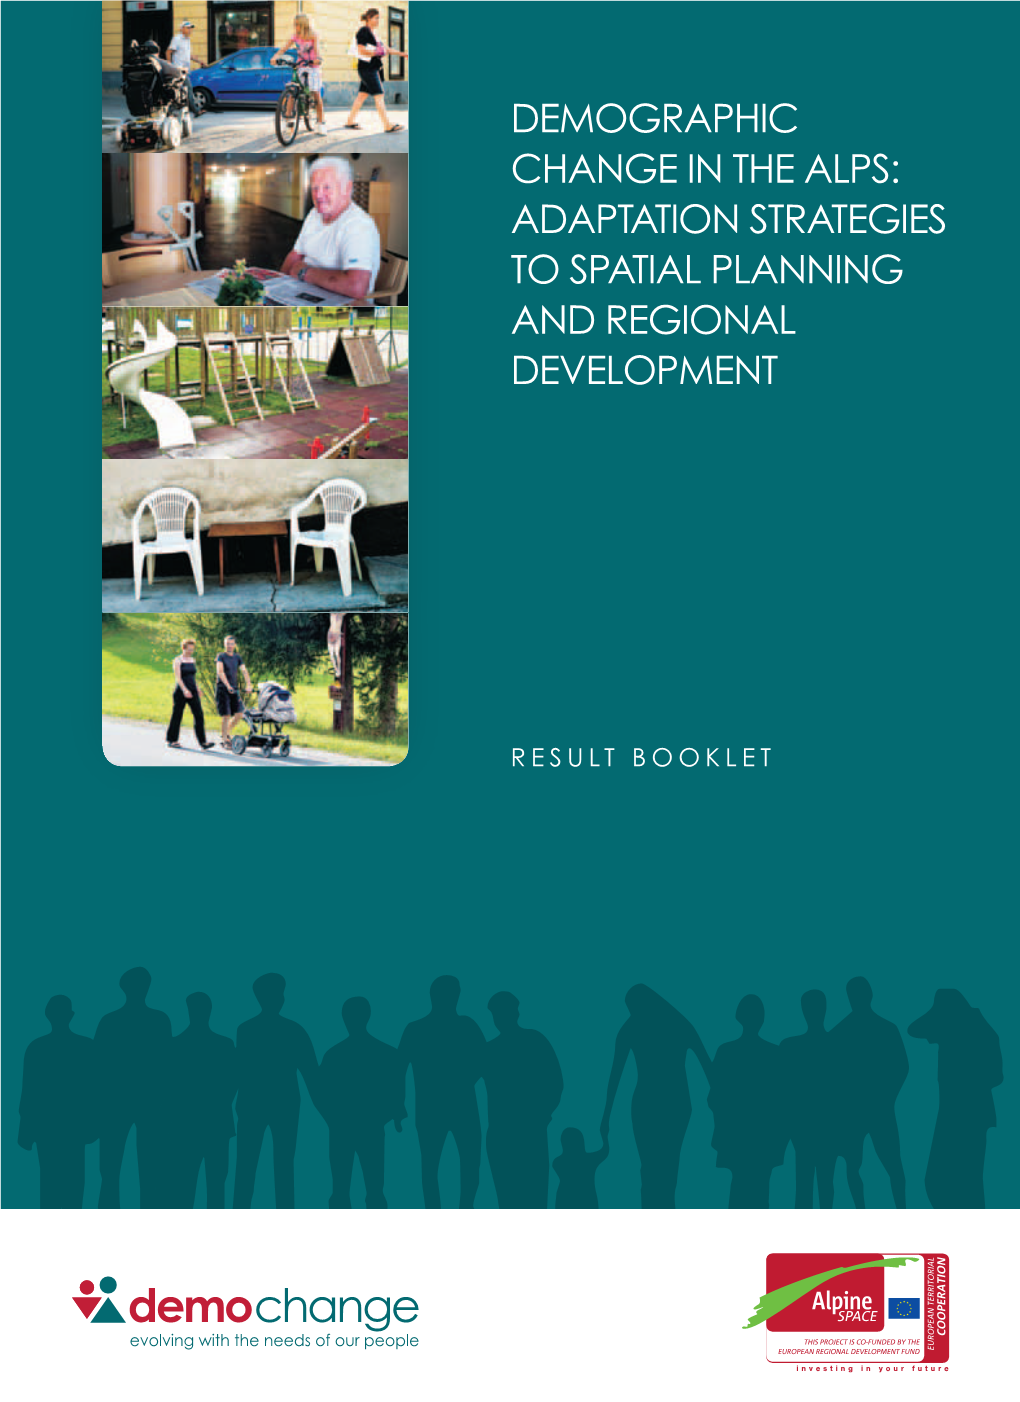 Demographic Change in the Alps: Adaptation Strategies to Spatial Planning and Regional Development